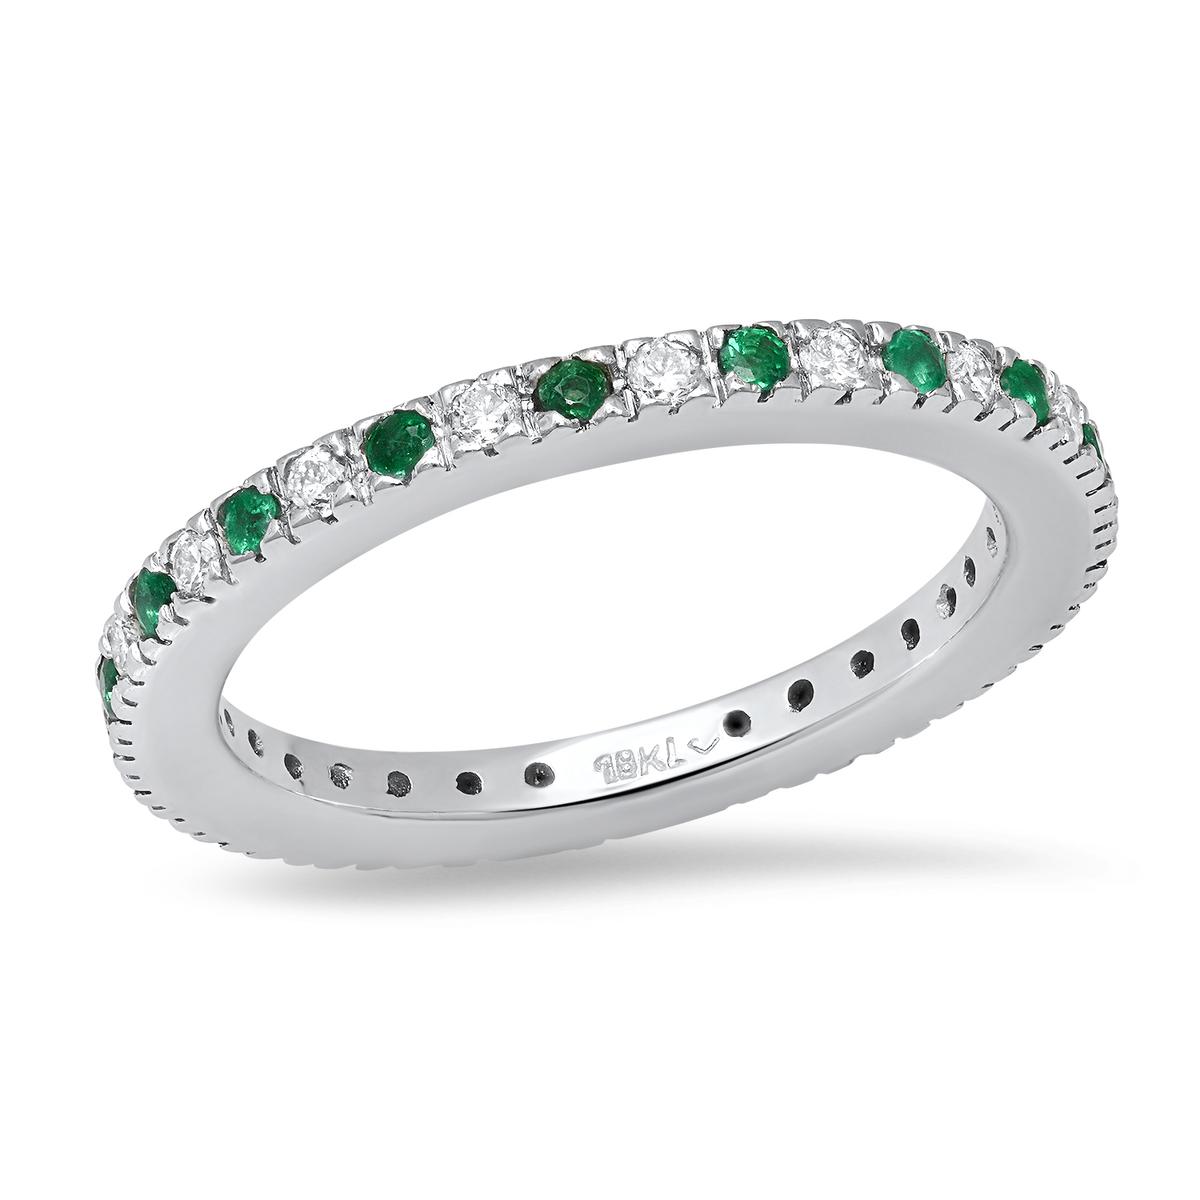 18K White Gold Setting with 0.37ct Emerald and 0.37ct Diamond Band